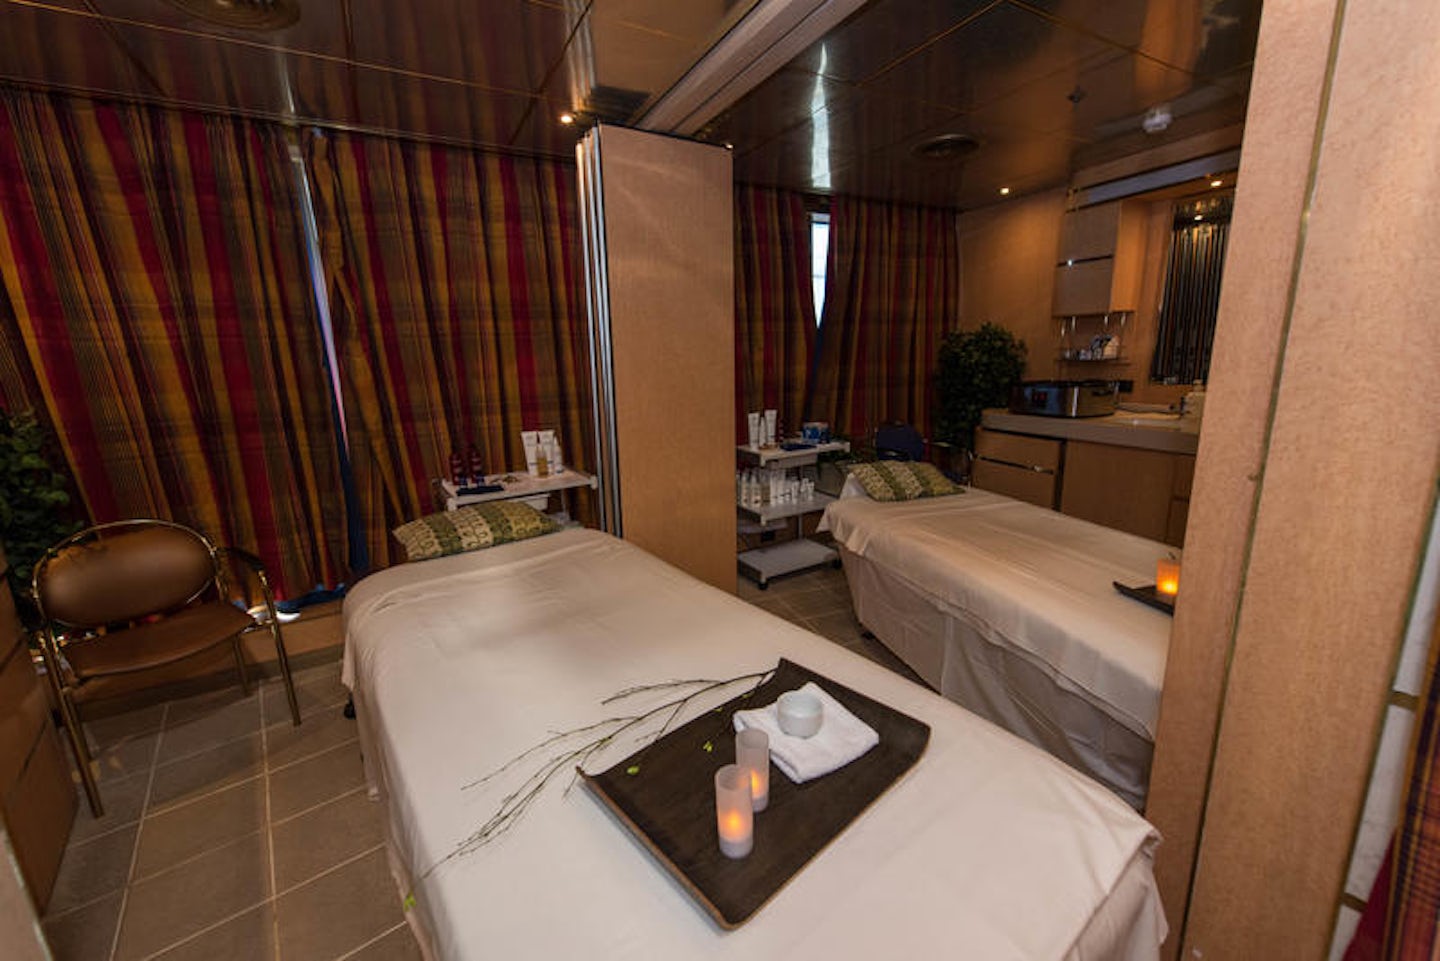 The Greenhouse Spa on Noordam